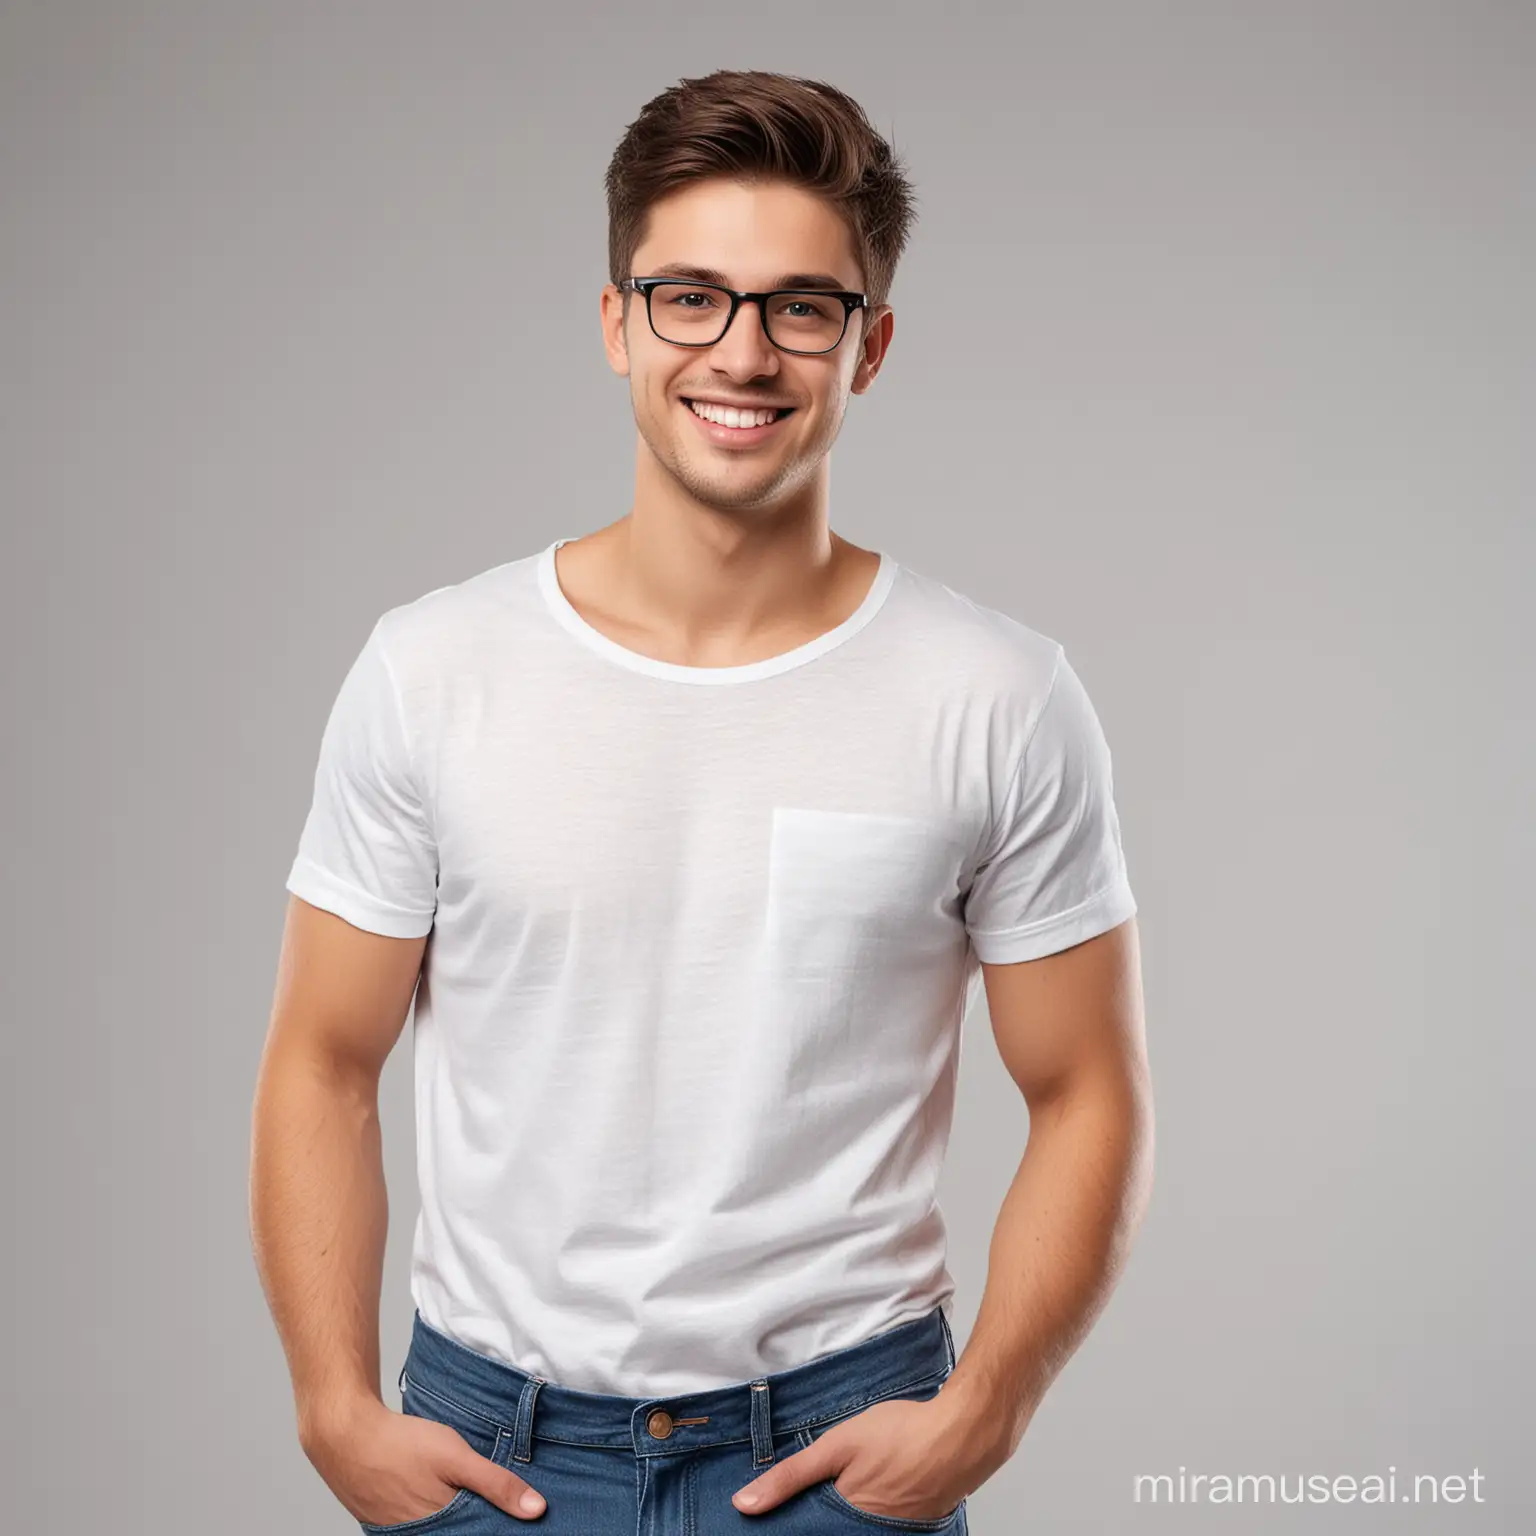 A standing photorealistic attractive smiling man 20 years old in jeans and a smooth white T-shirt without pockets and strapless, with glasses on his nose, a front view of half body perpendicular to the lens in a photographic studio isolated on a white background.